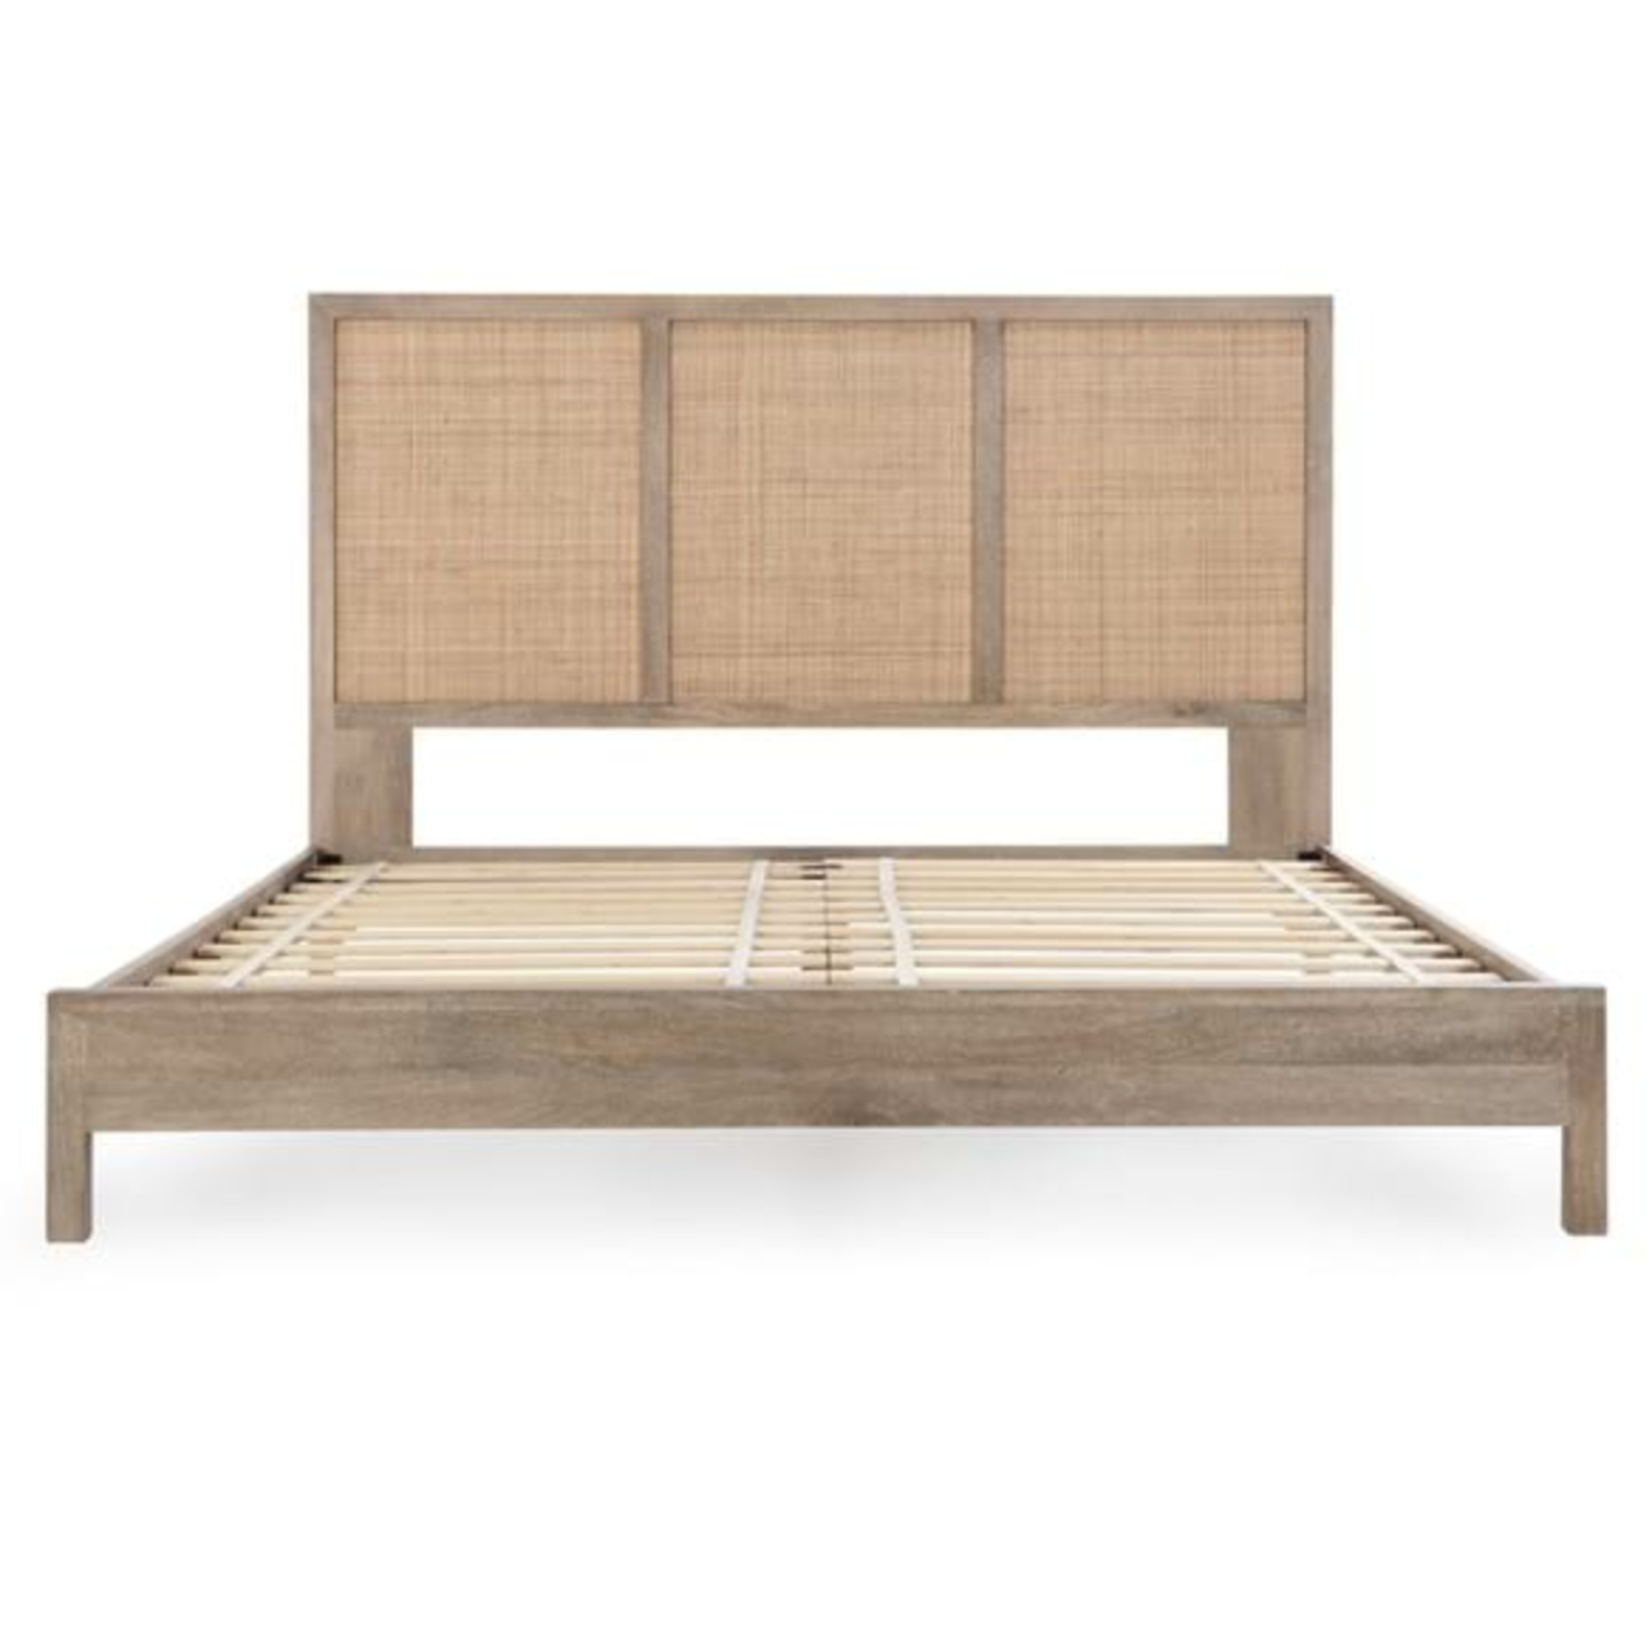 Outside The Box 61x80x54 Jensen Cane & Mango Wood Taupe Queen Bed